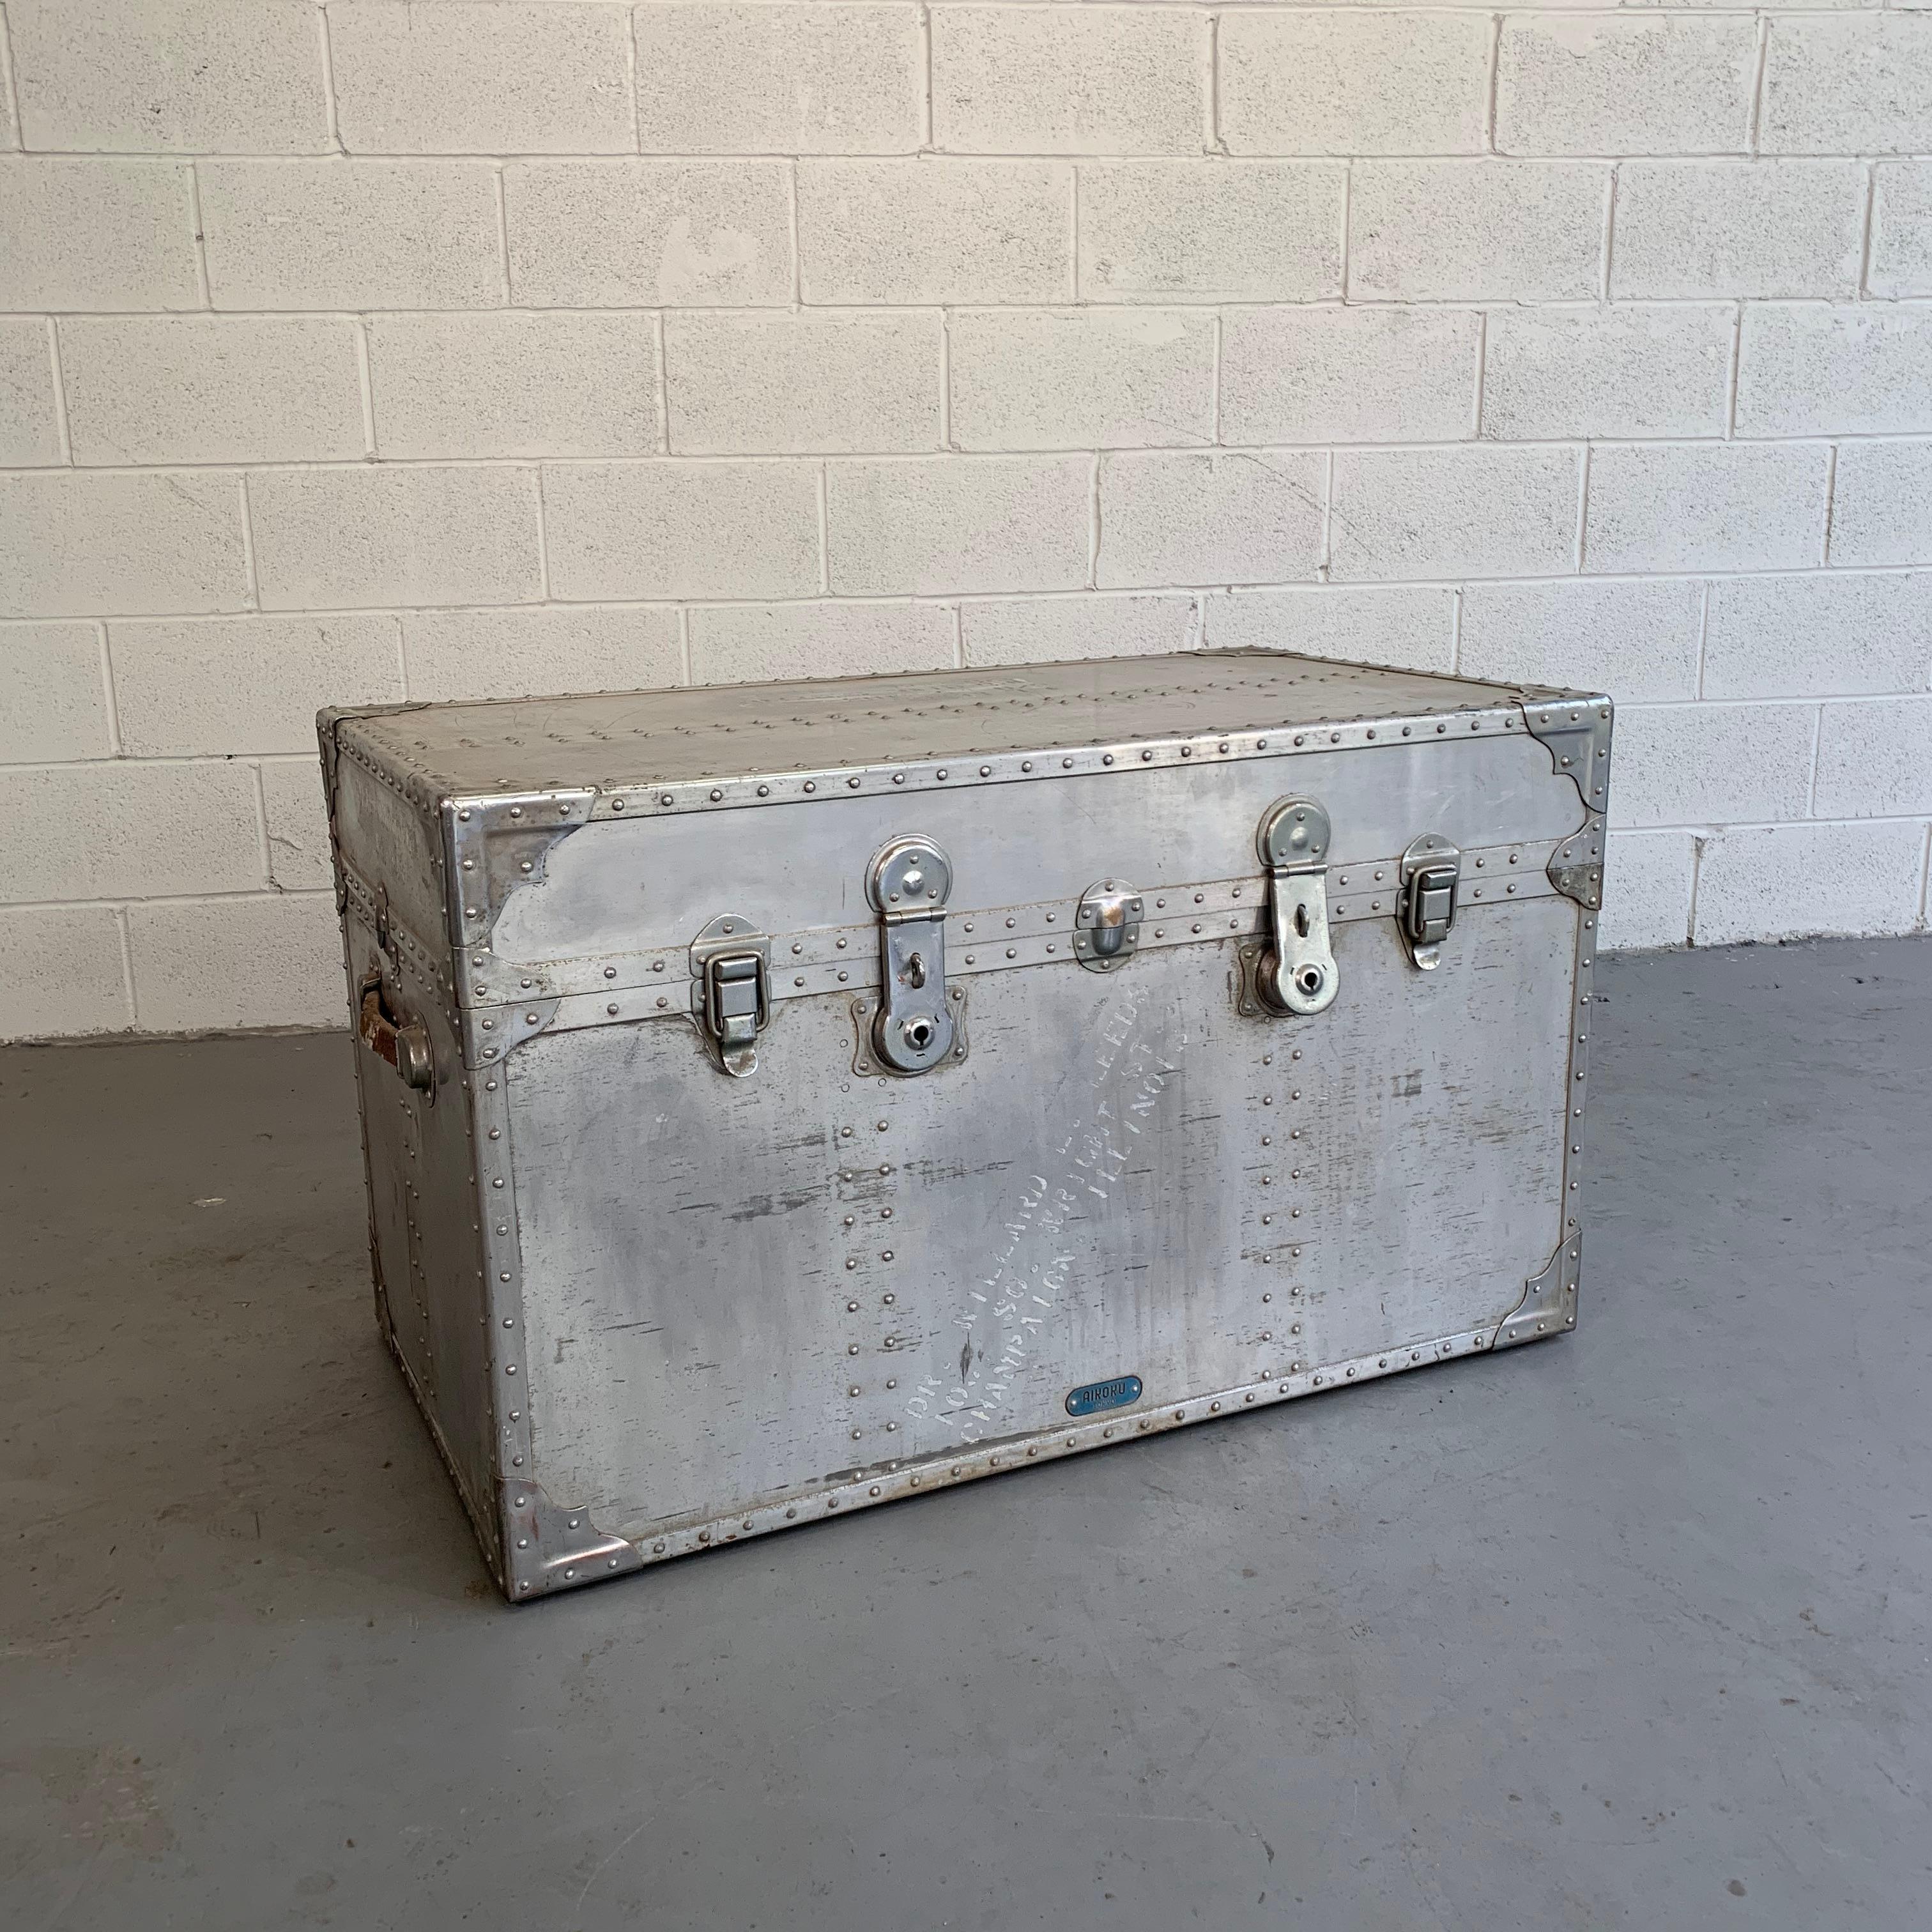 Oversized, industrial, aluminum, military trunk features riveted edges, leather handles and original cargo stamps with its original green painted interior. Other aluminum trunks are available.